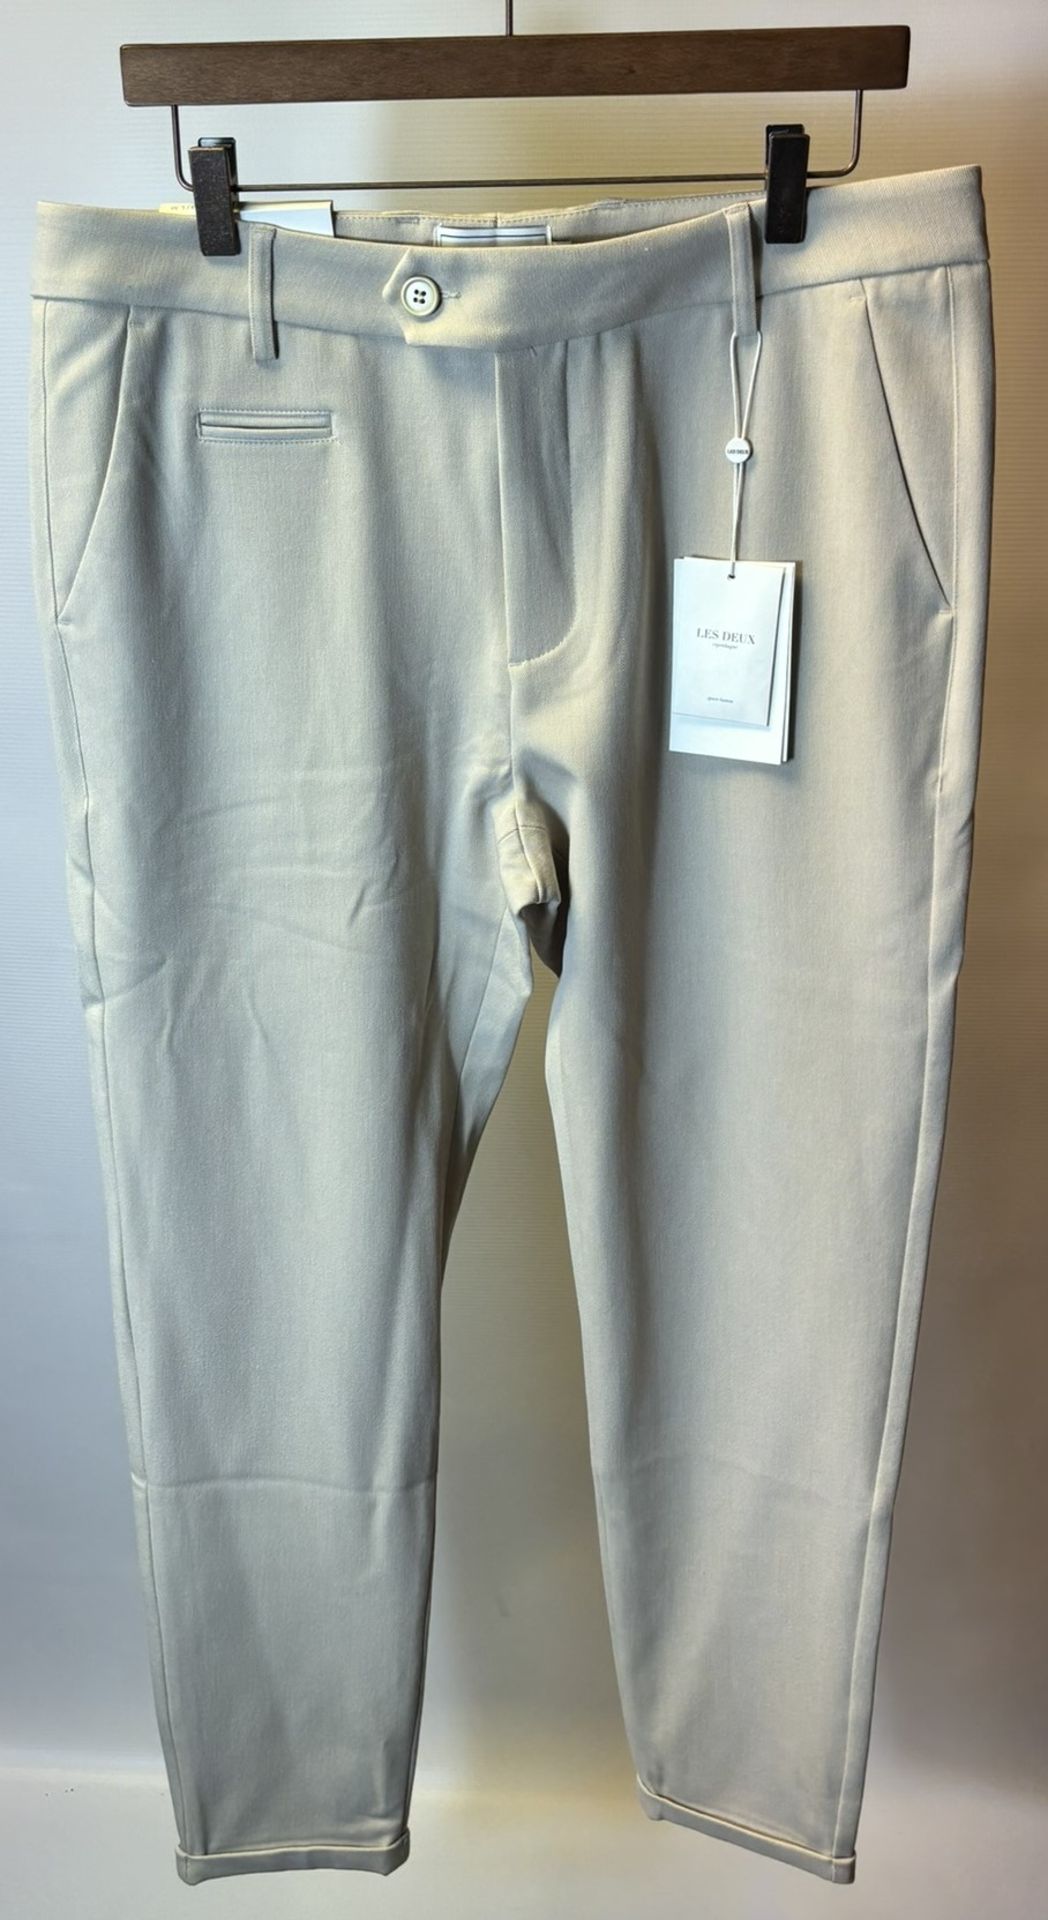 15 x Various Pairs Of Women's Trousers As Seen In Photos - Image 37 of 45